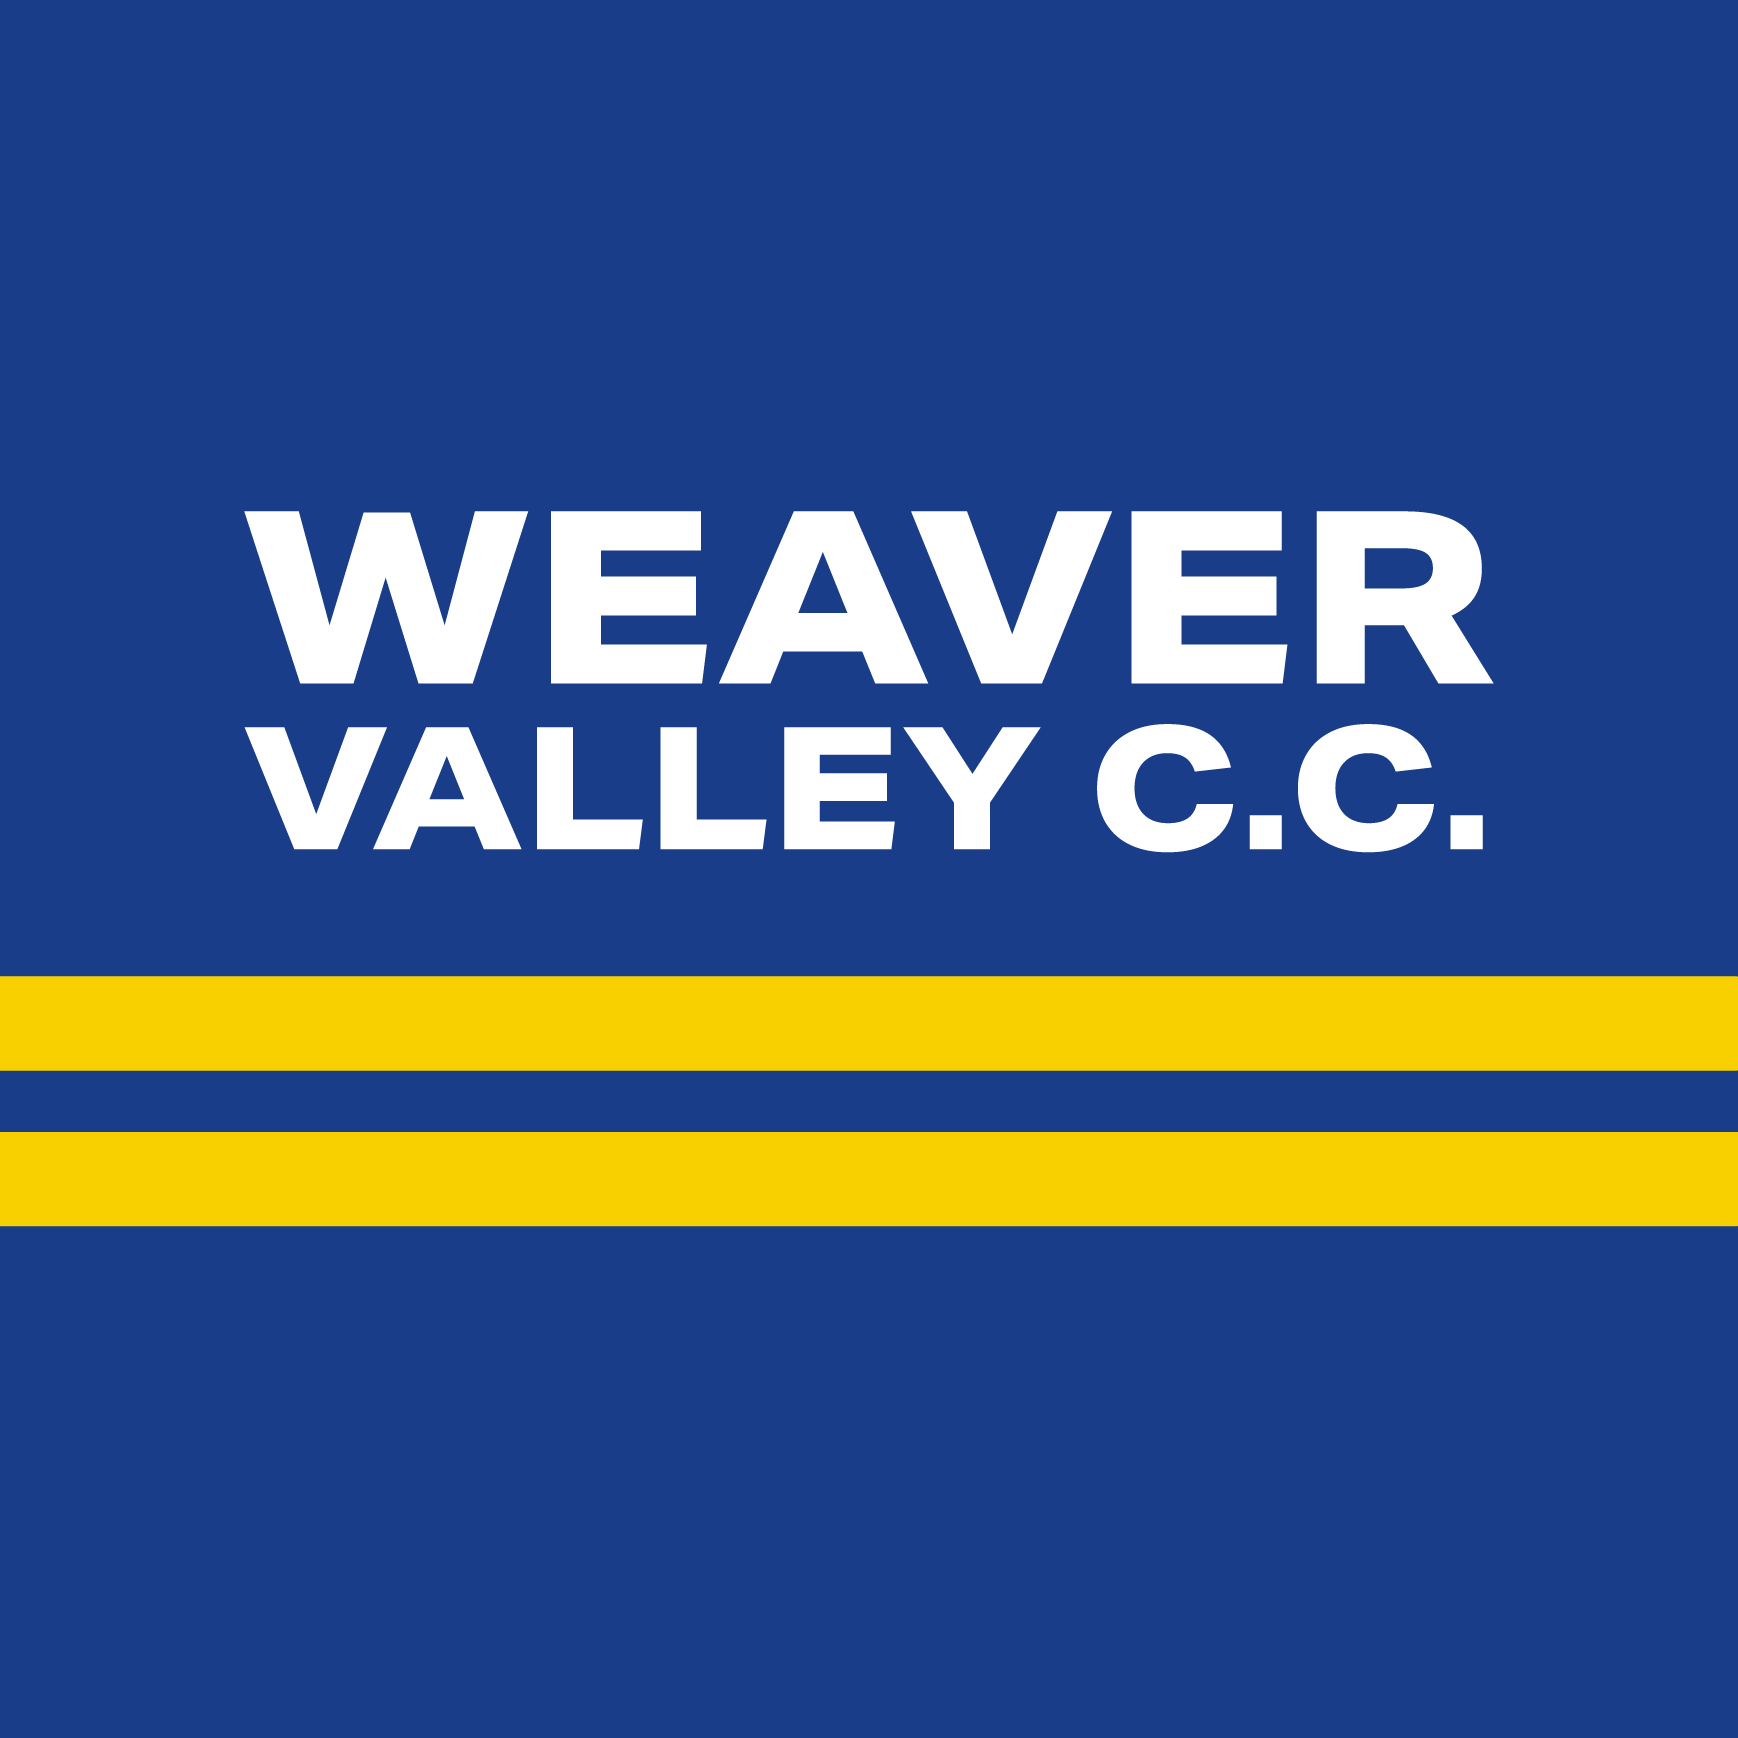 Club Image for WEAVER VALLEY CLASSIC